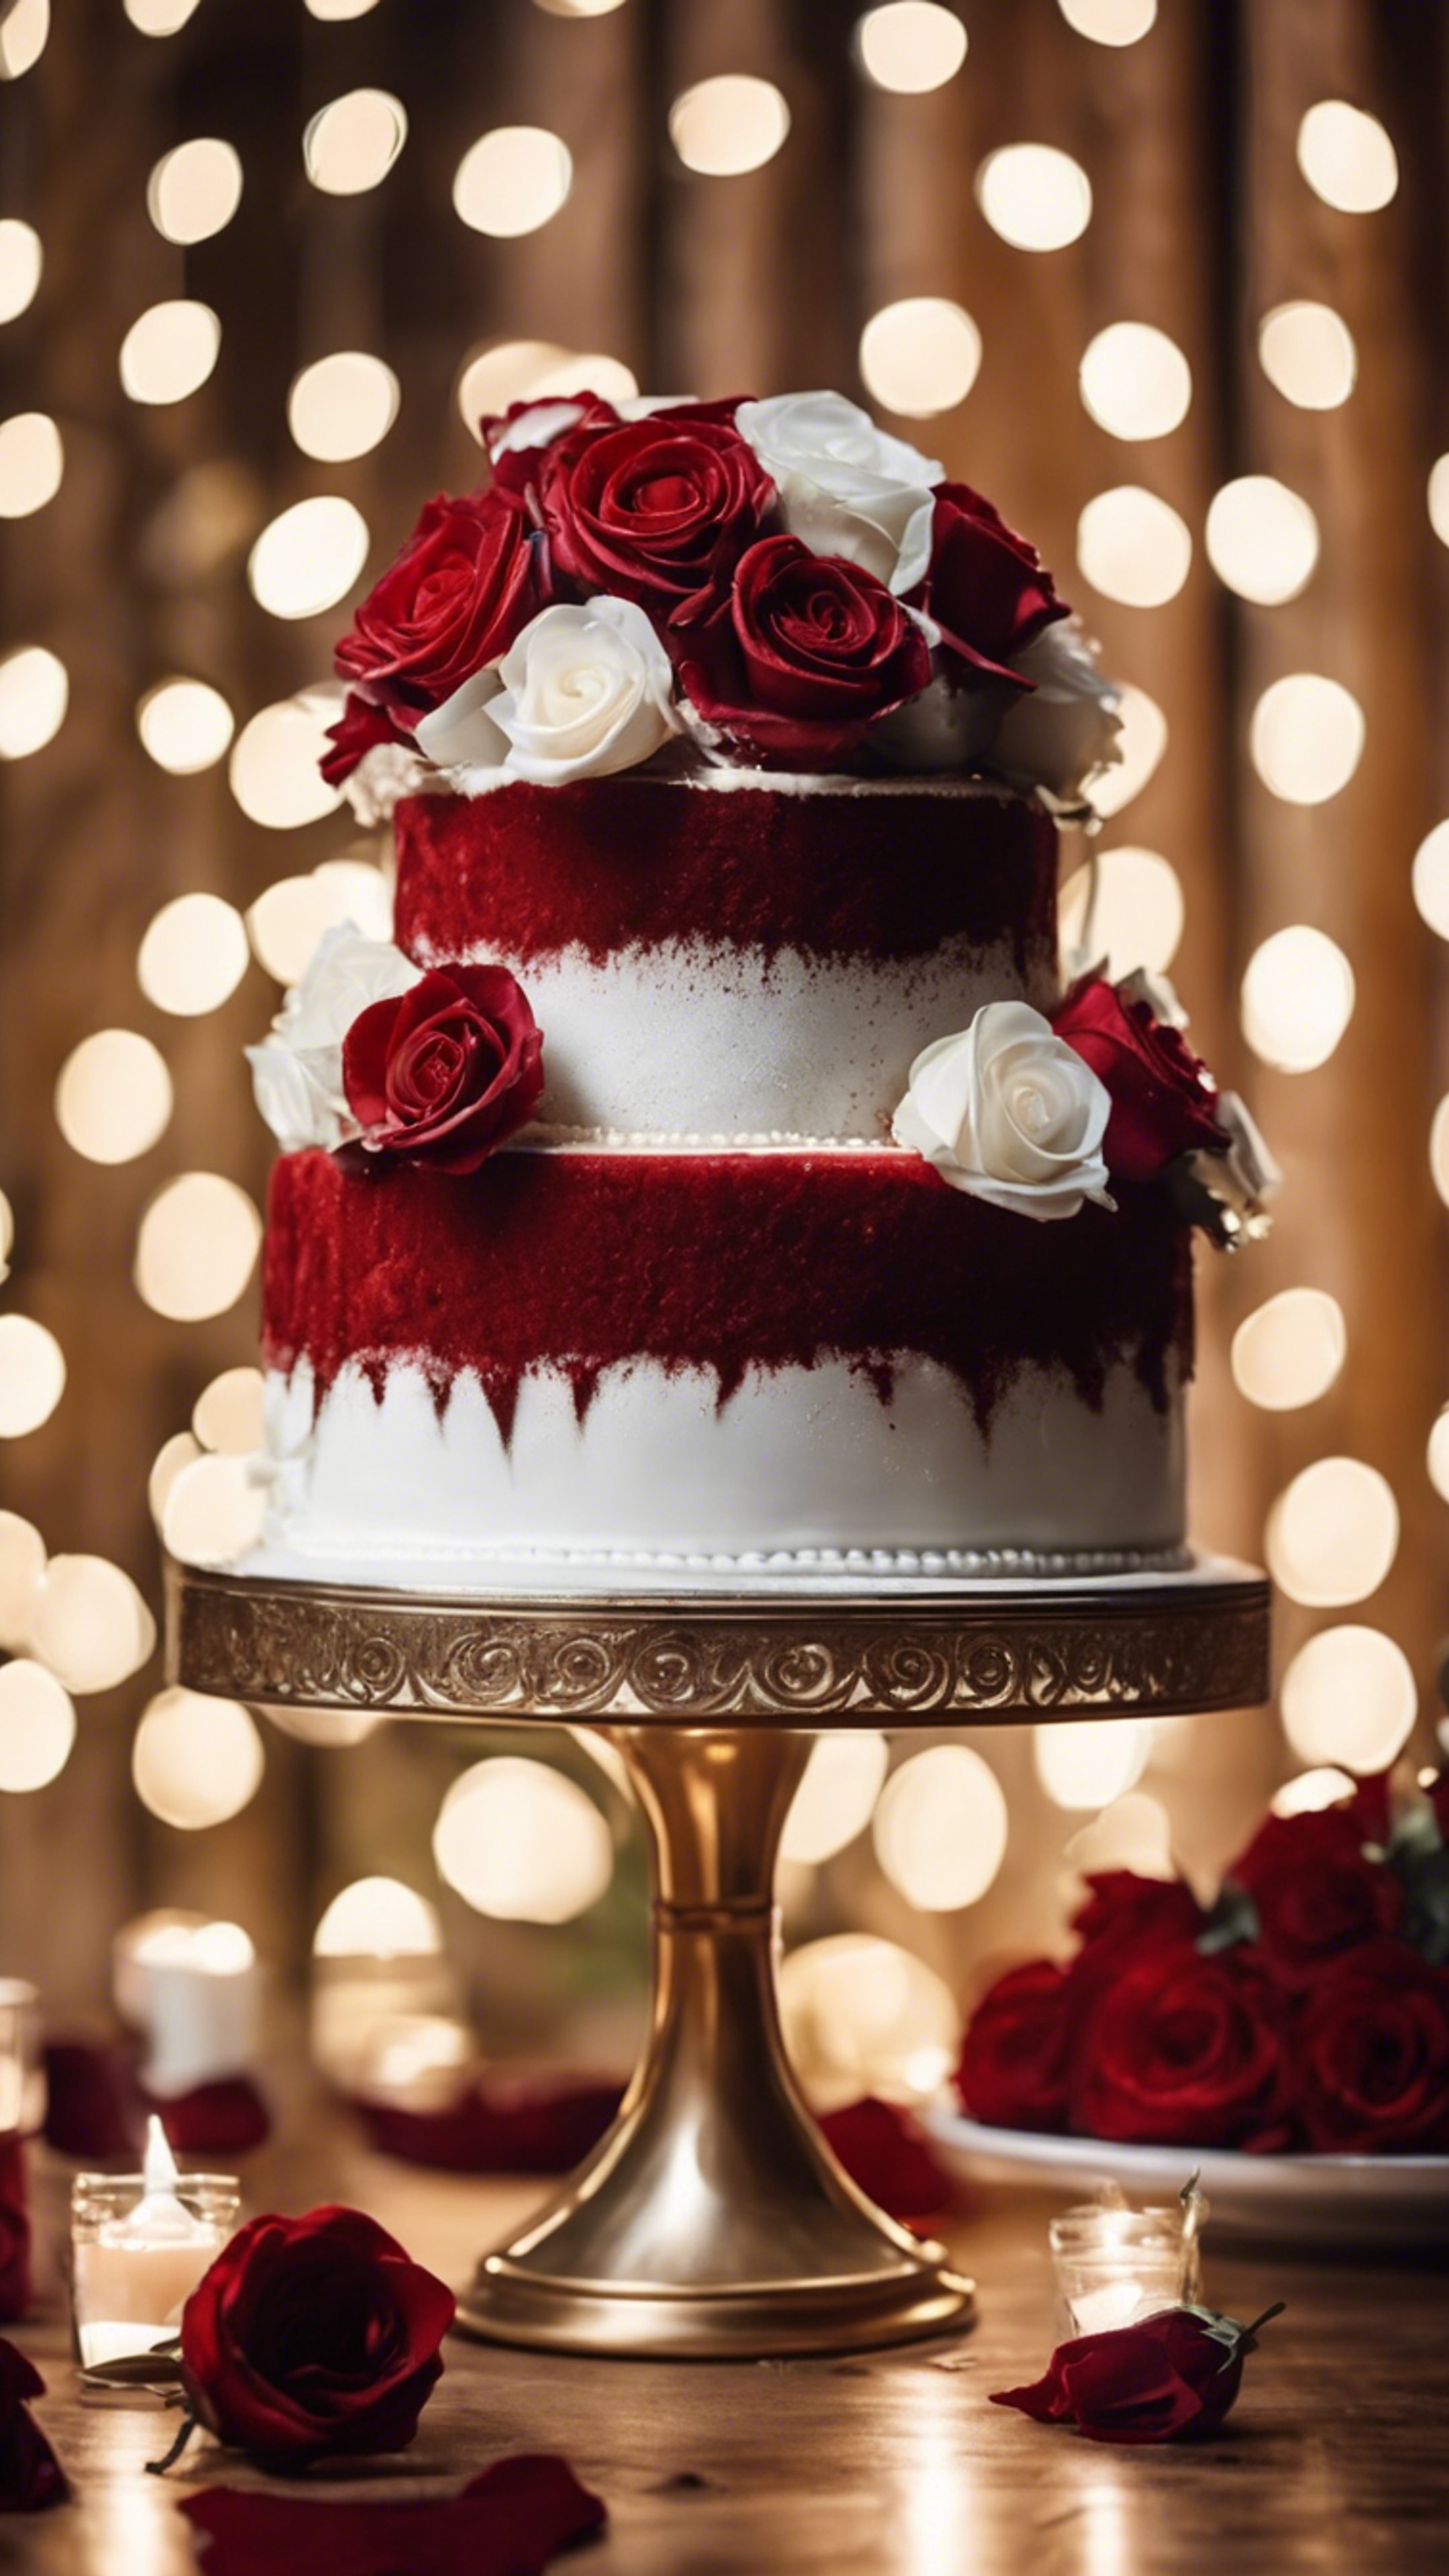 Three-tiered red velvet wedding cake adorned with white roses, against a backdrop of twinkling fairy lights. Tapeta[b48557e9e8f84a90b888]